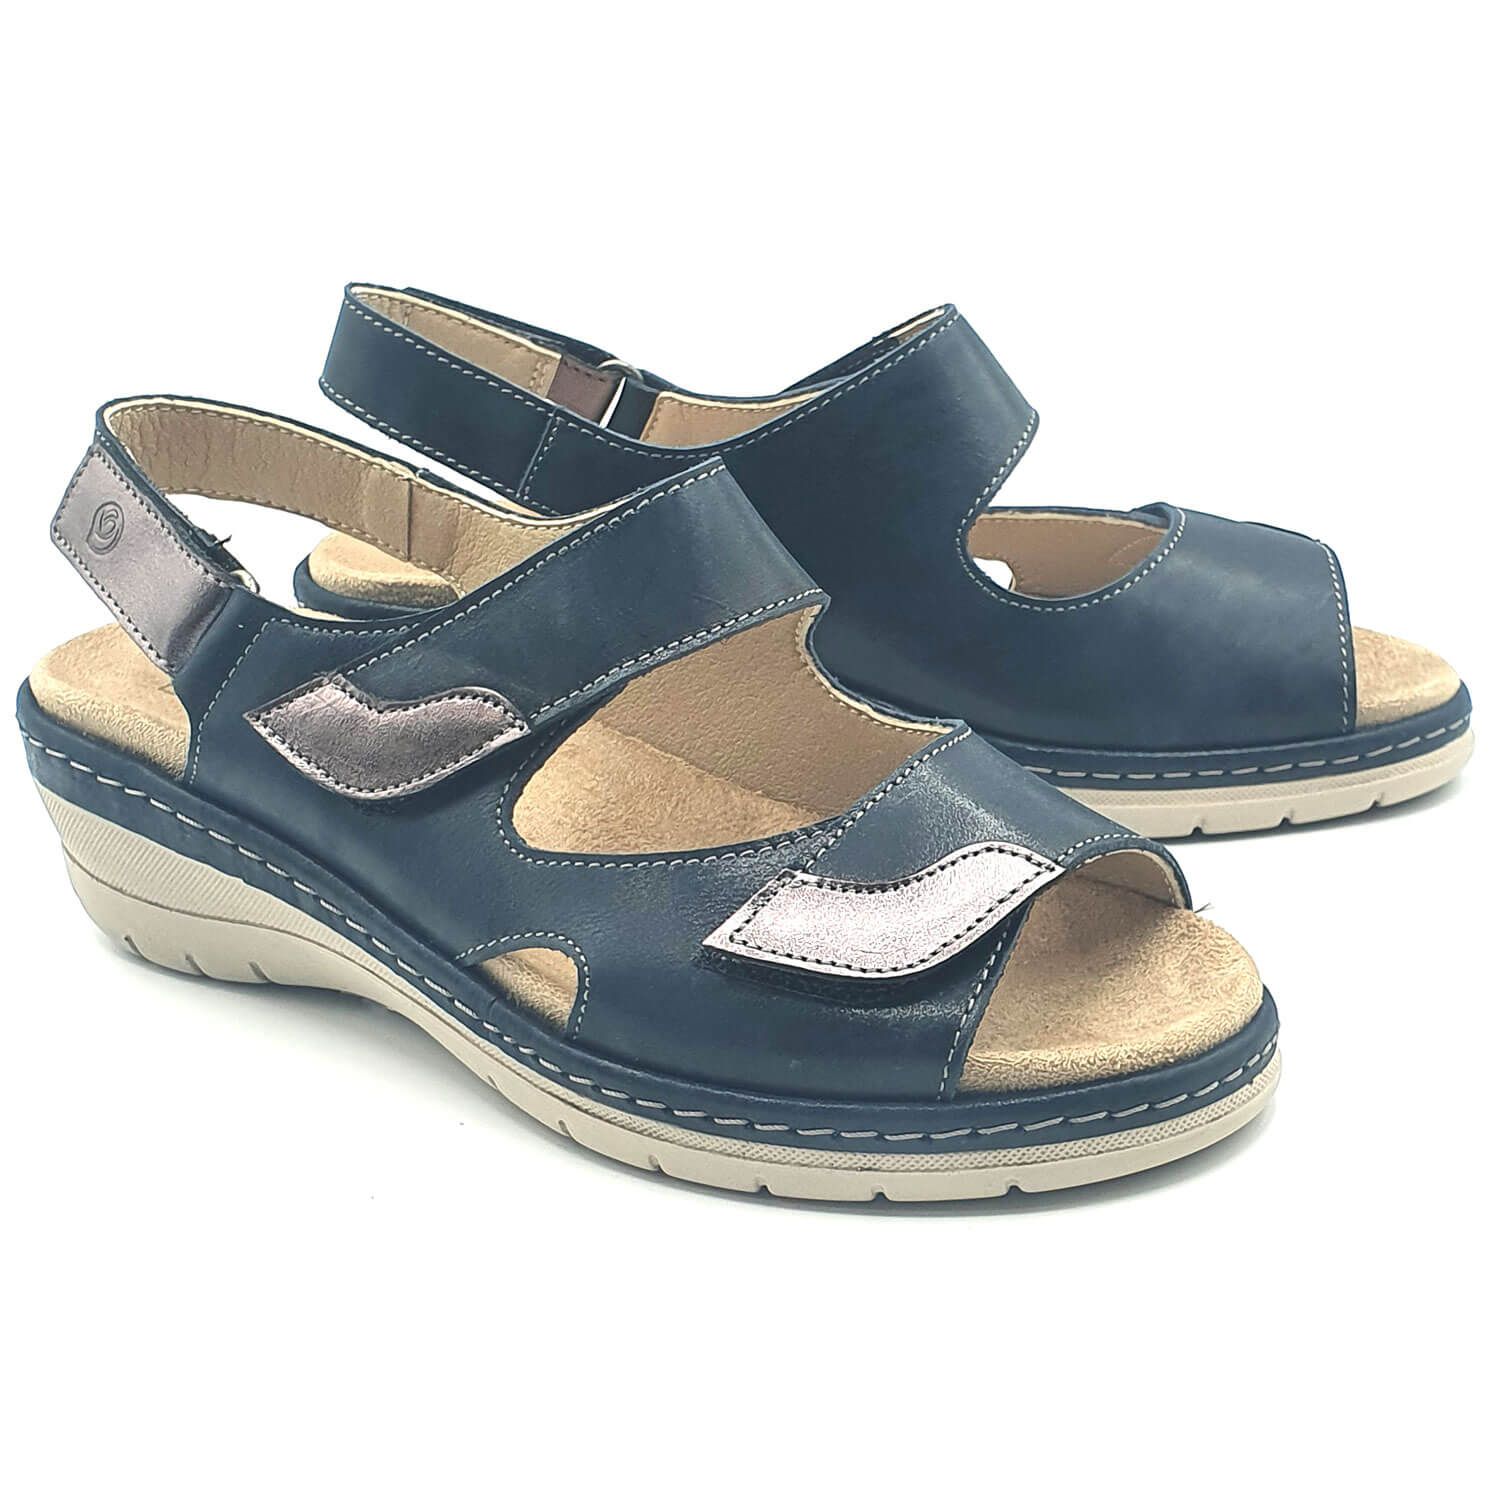 Suave footwear Miami Open Sandal - Navy 1 Shaws Department Stores